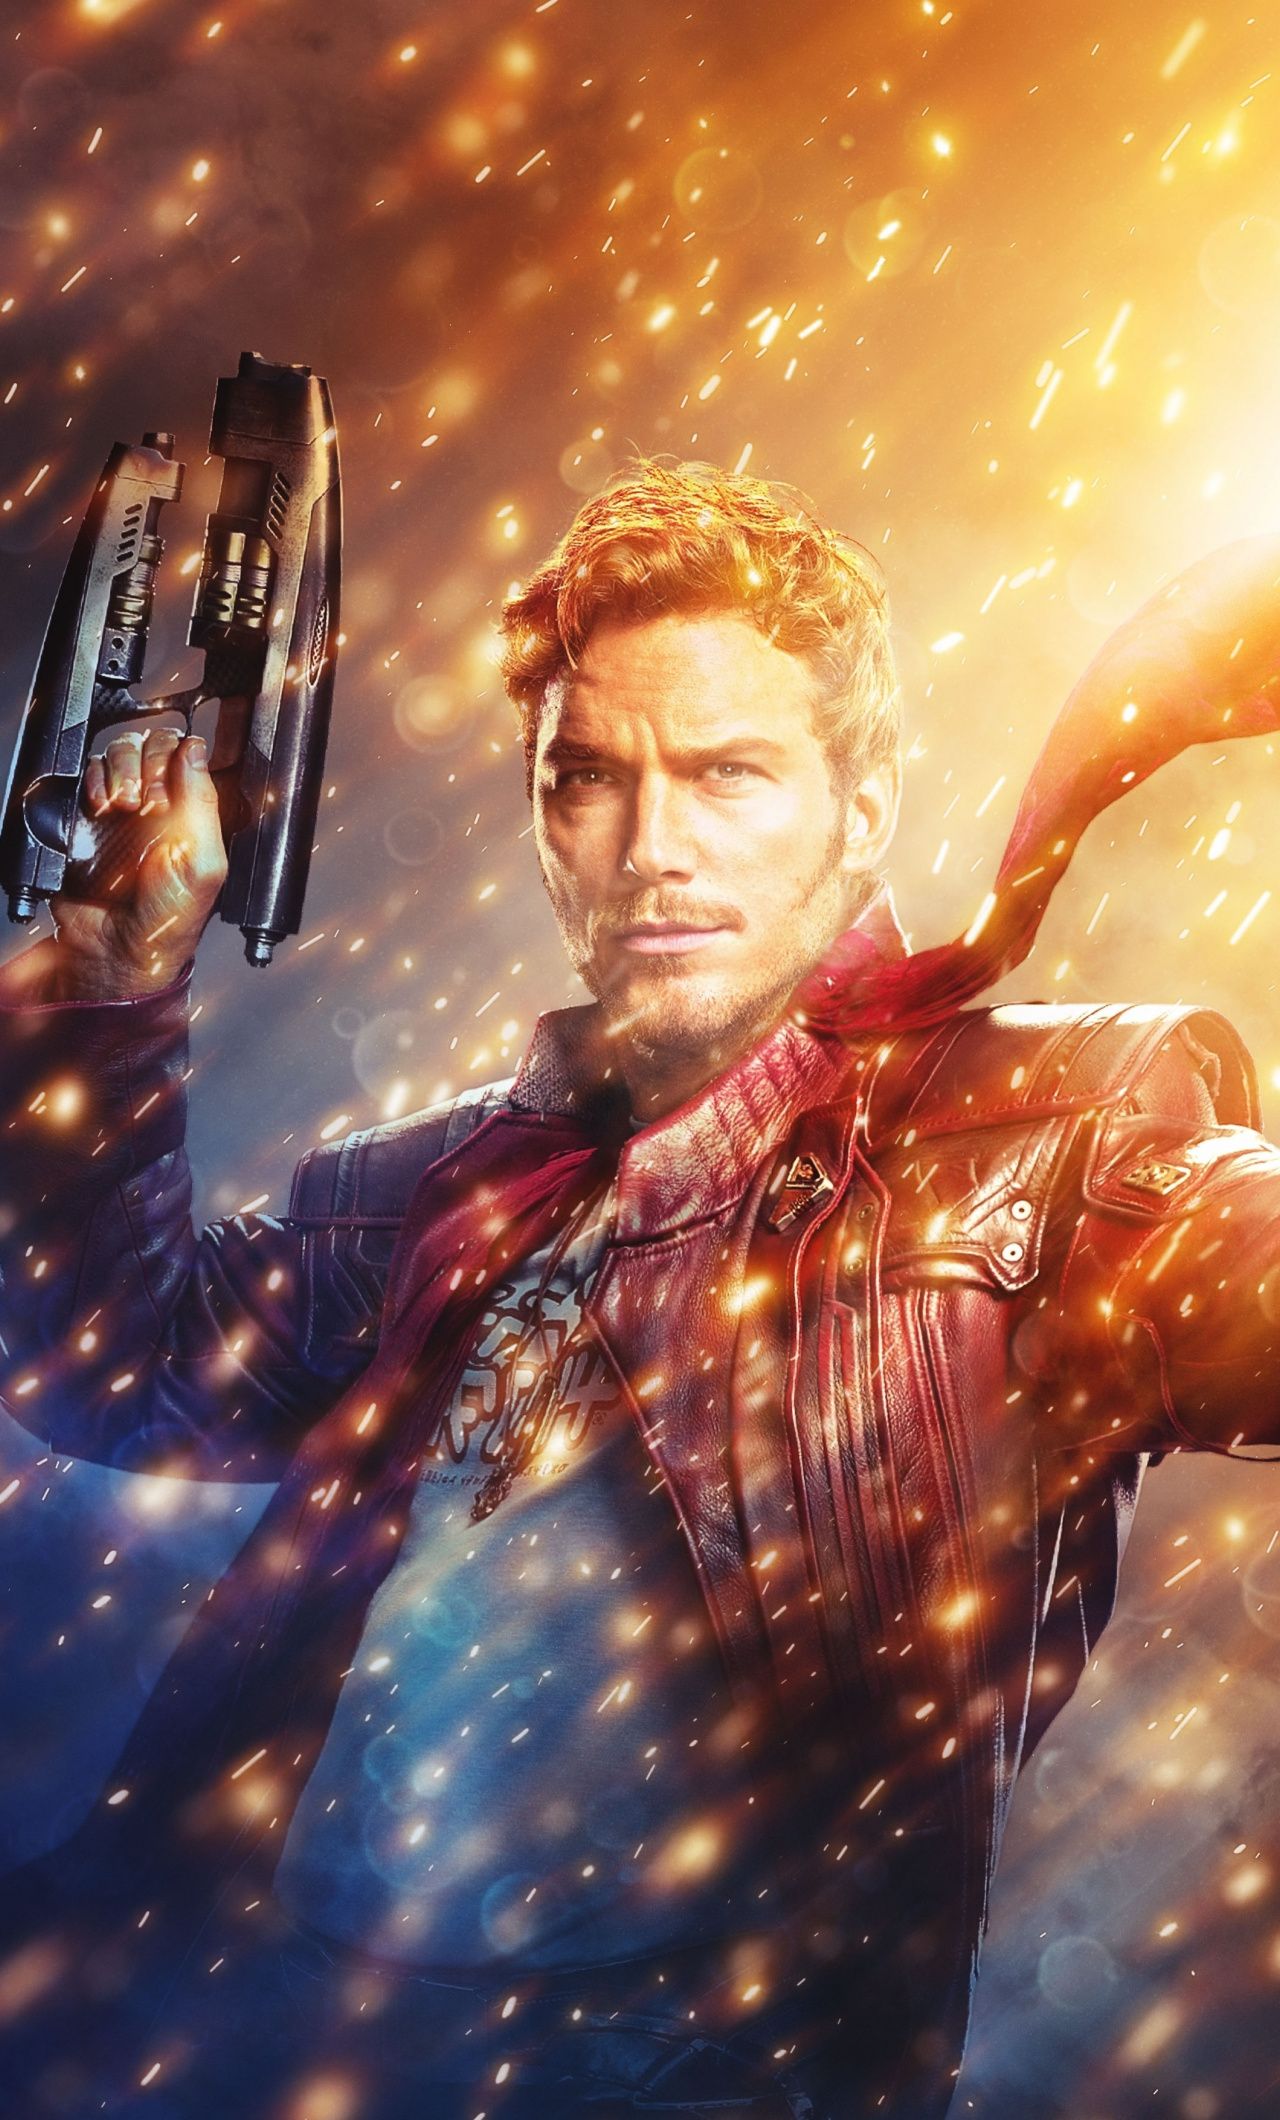 The Guardians Of The Galaxy, Movie, Star Lod, Chris Pratt, Art, 1280x2120 Wallpaper. Guardians Of The Galaxy, Star Lord, Galaxy Movie